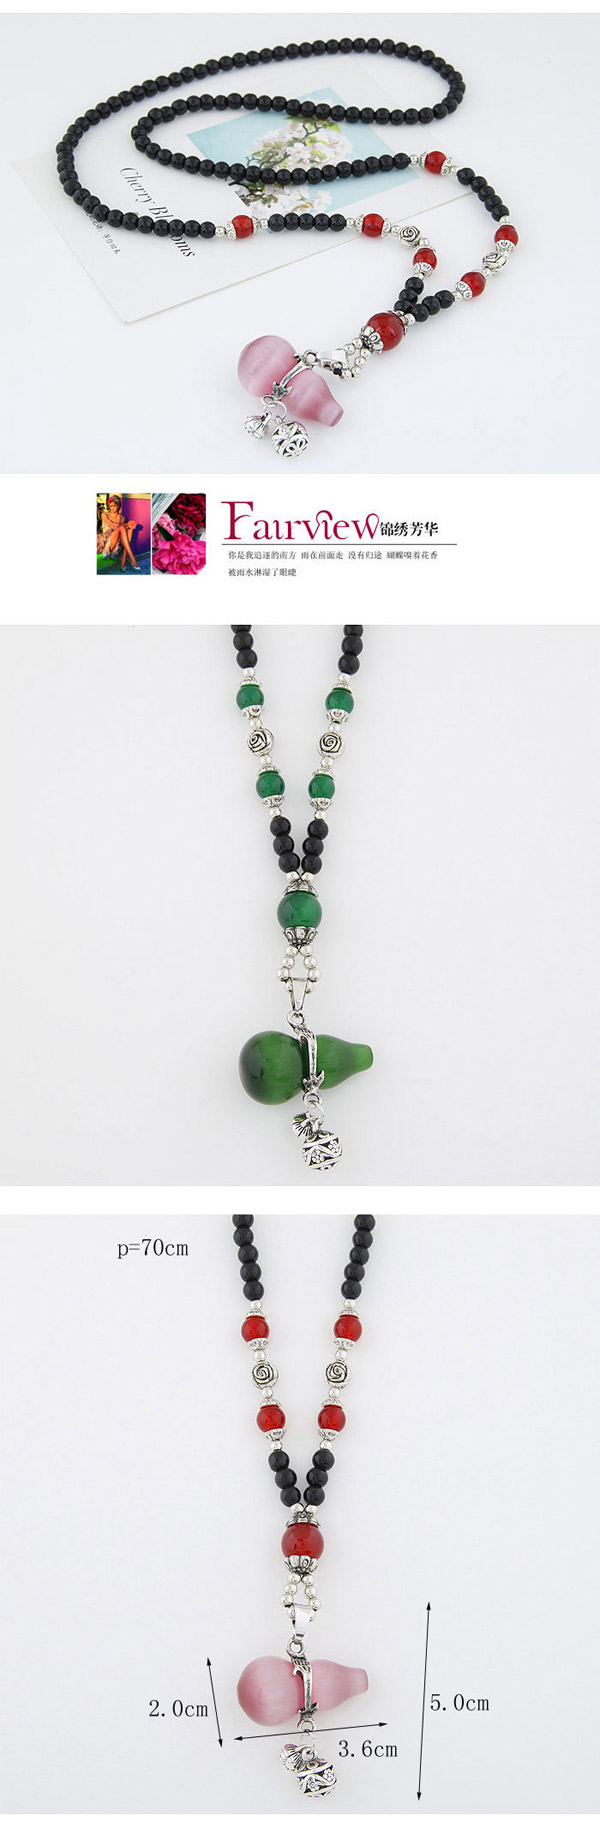 Fashion Dark Green Beads Decorated Calabash Shape Pendant Design Alloy Beaded Necklaces,Beaded Necklaces